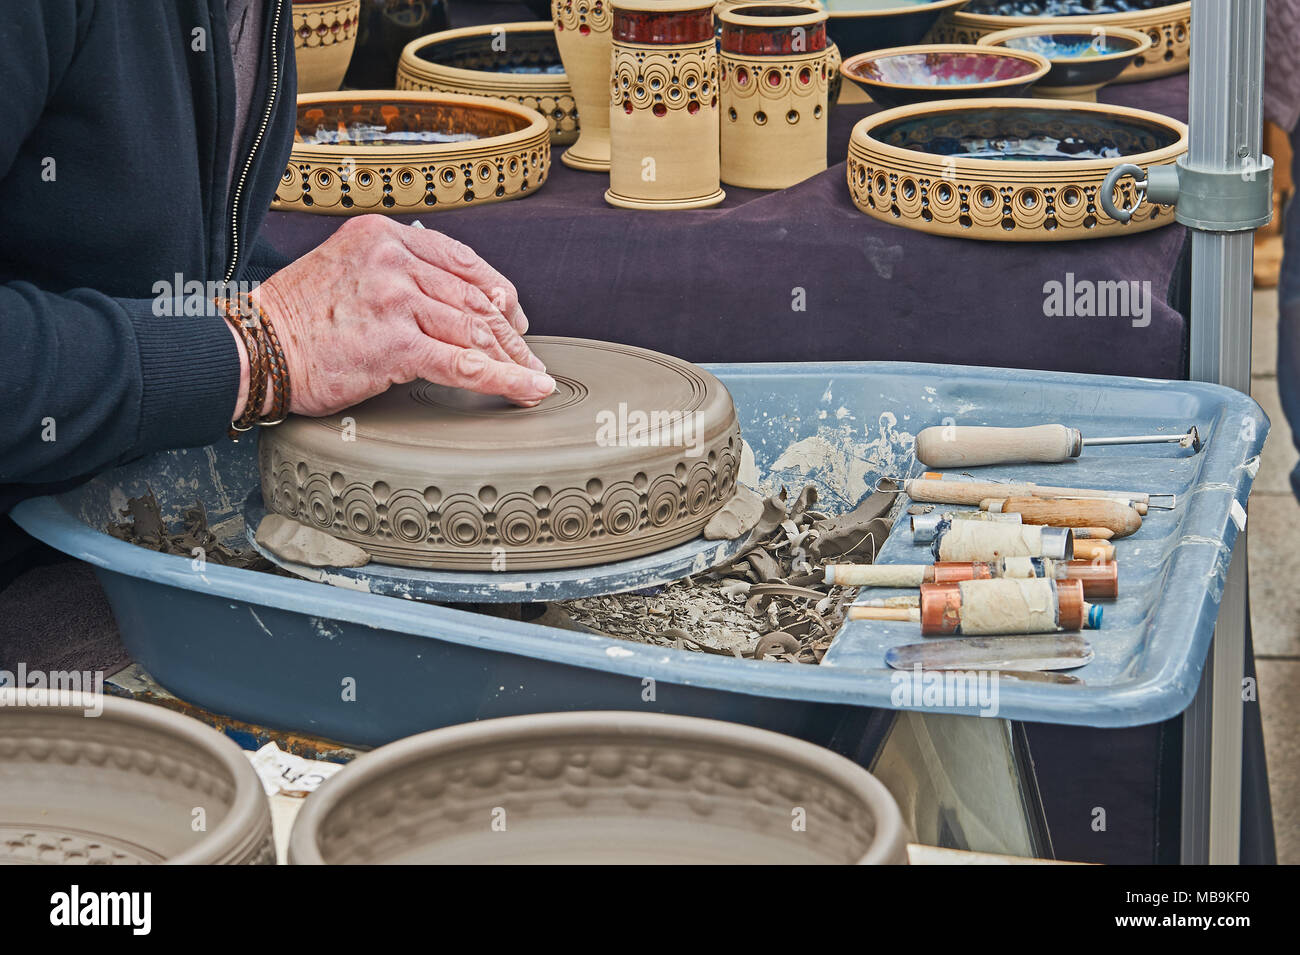 Potter producing ornate bowls at a craft market in Stratford upon Avon Stock Photo